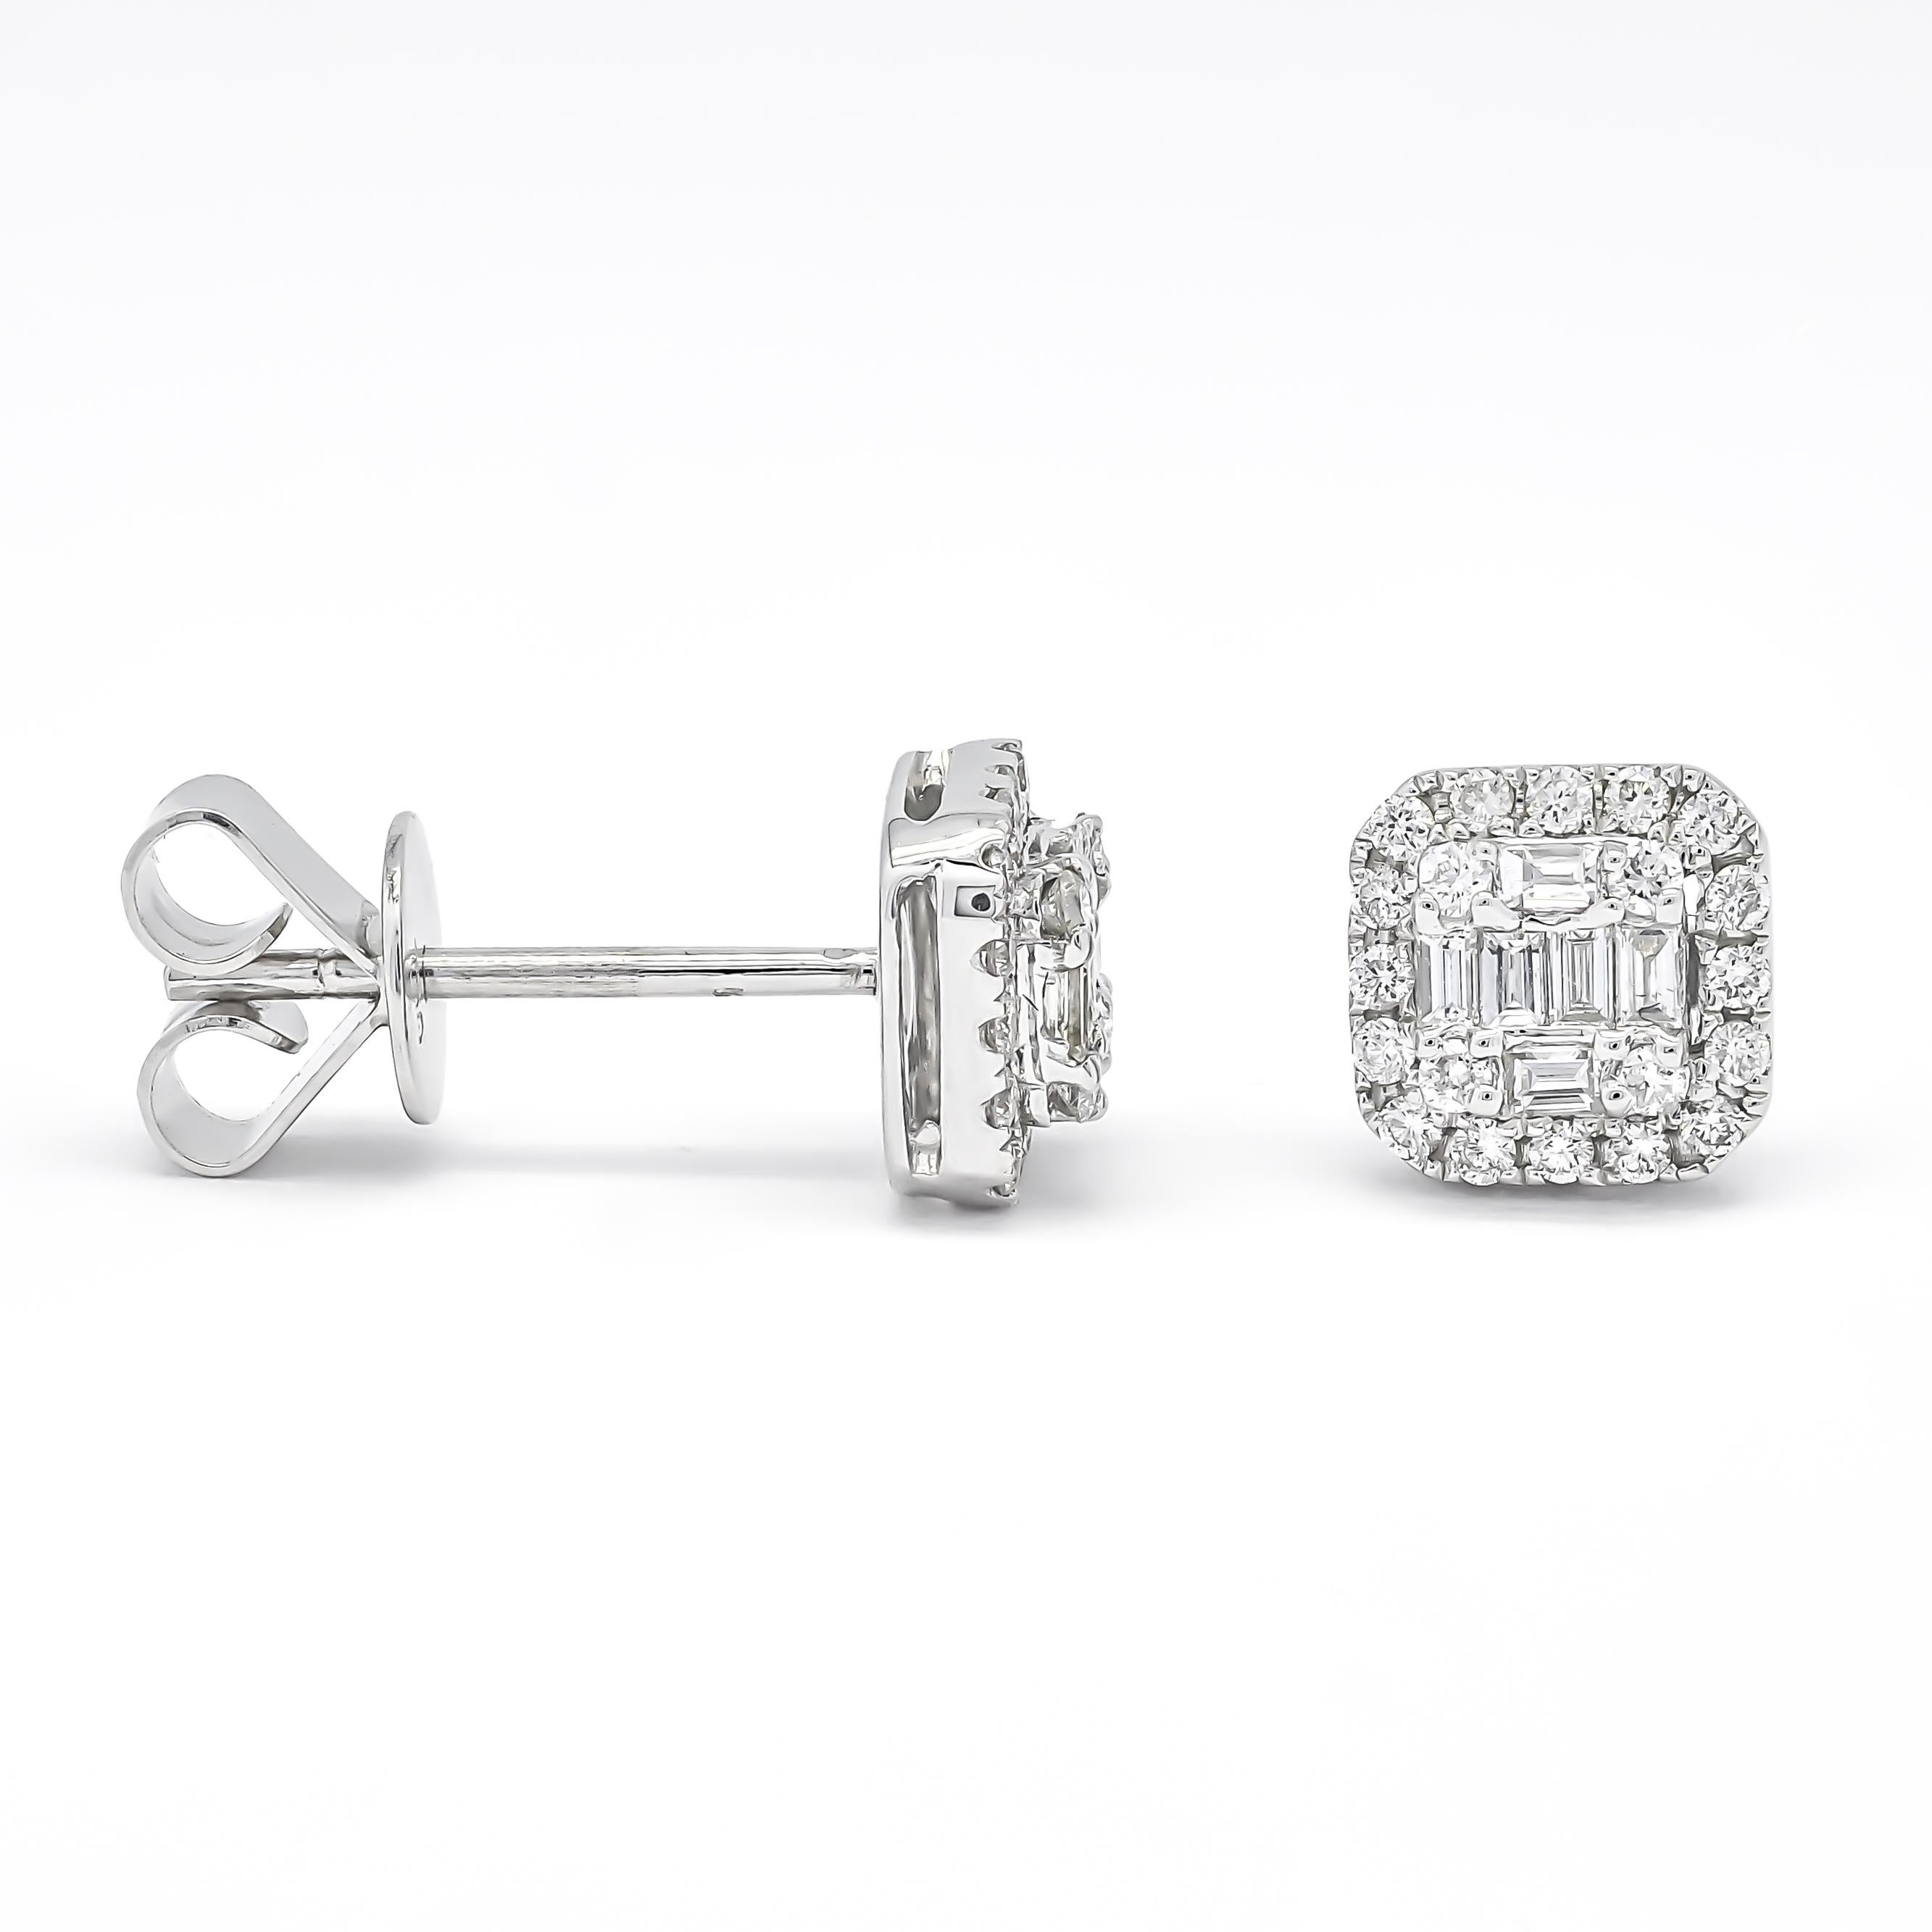 Get ready to radiate with irresistible charm wearing these stunning round and baguette diamond cluster square stud earrings. Each earring emits an air of dazzling energy that is sure to captivate attention and leave onlookers spellbound.

The design